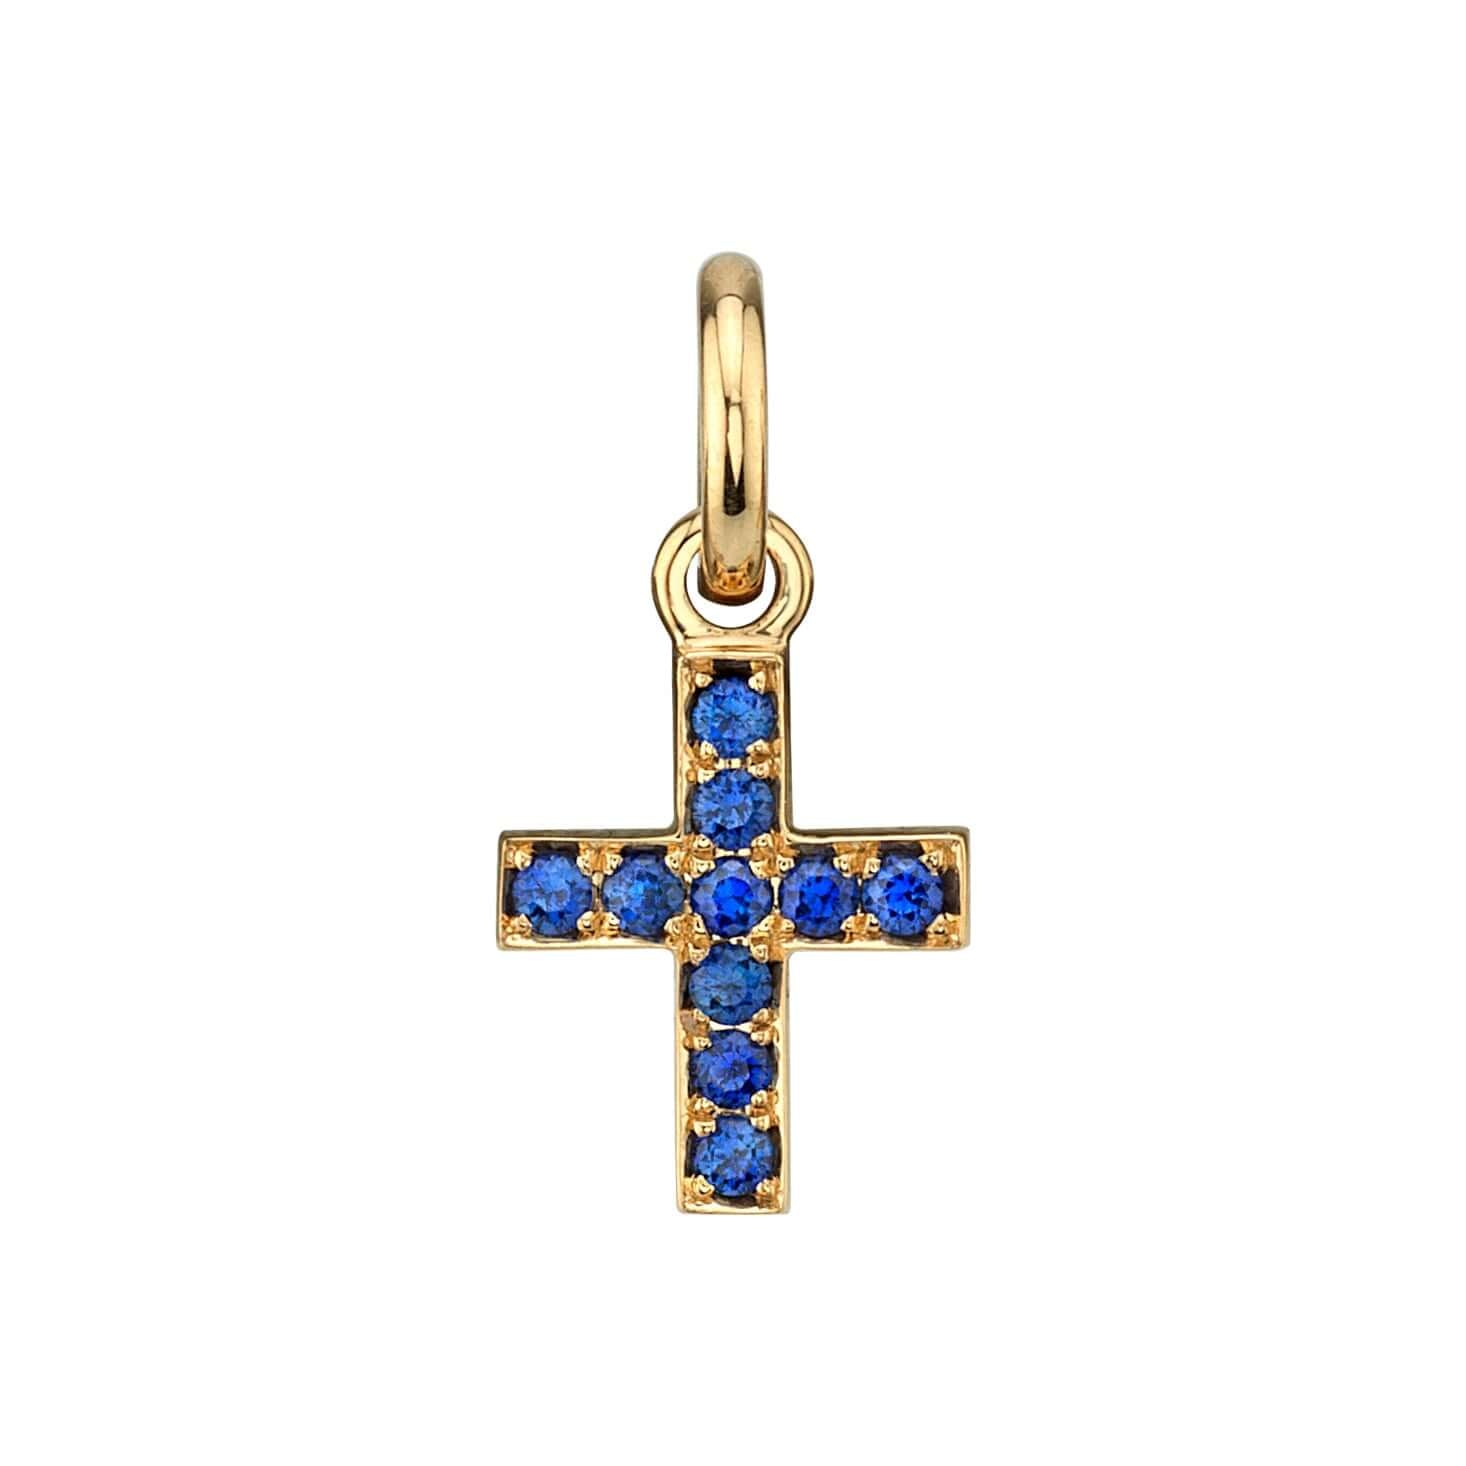 SINGLE STONE MINI CARMELA CROSS WITH GEMSTONES PENDANT featuring Approximately 0.15ctw round cut gemstones prong set in a handcrafted 18K yellow gold cross. Cross measures 8.20mm x 9.80mm. Price does not include chain.